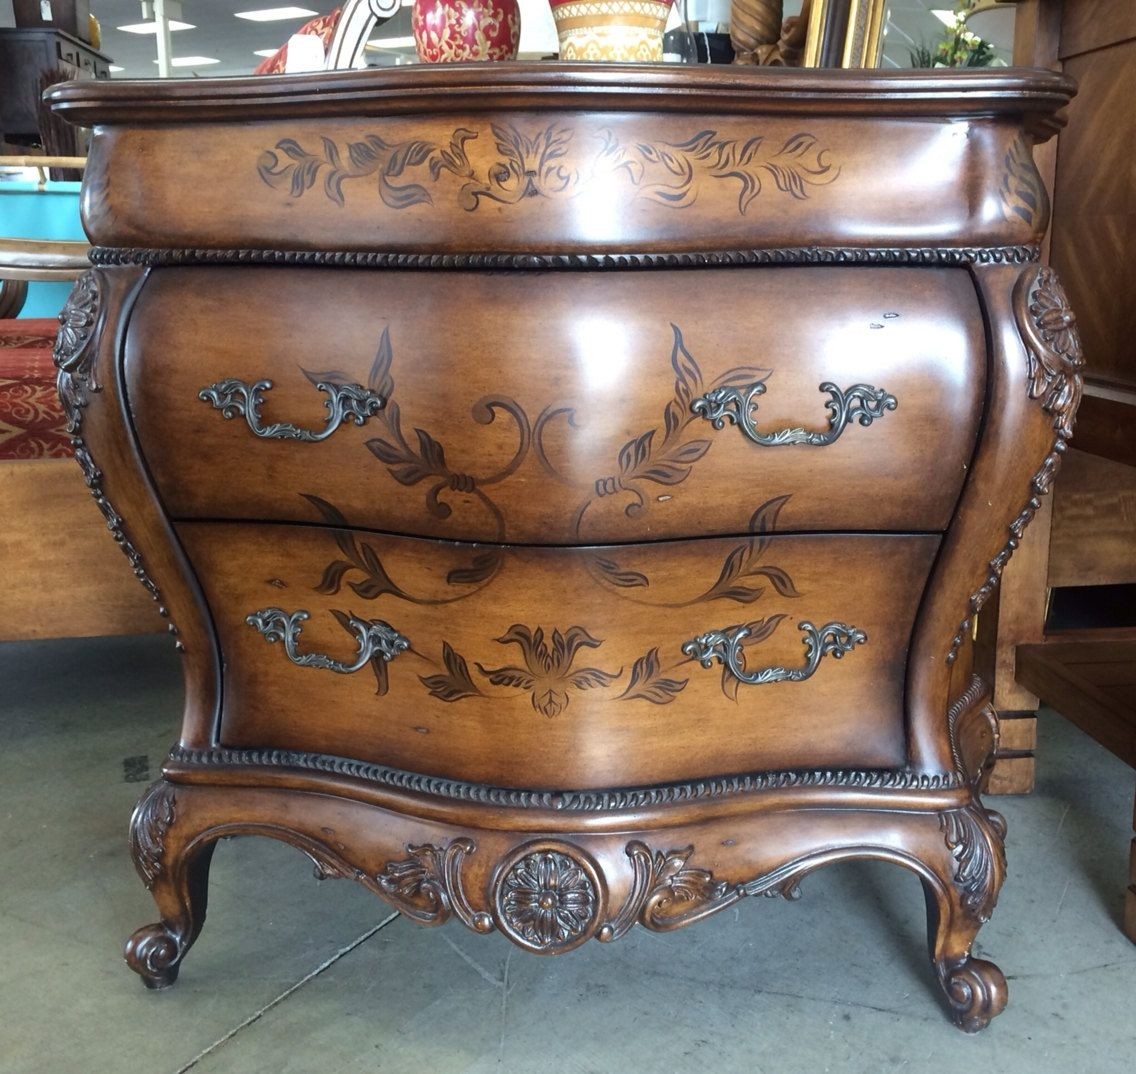 French provincial bombay chest by